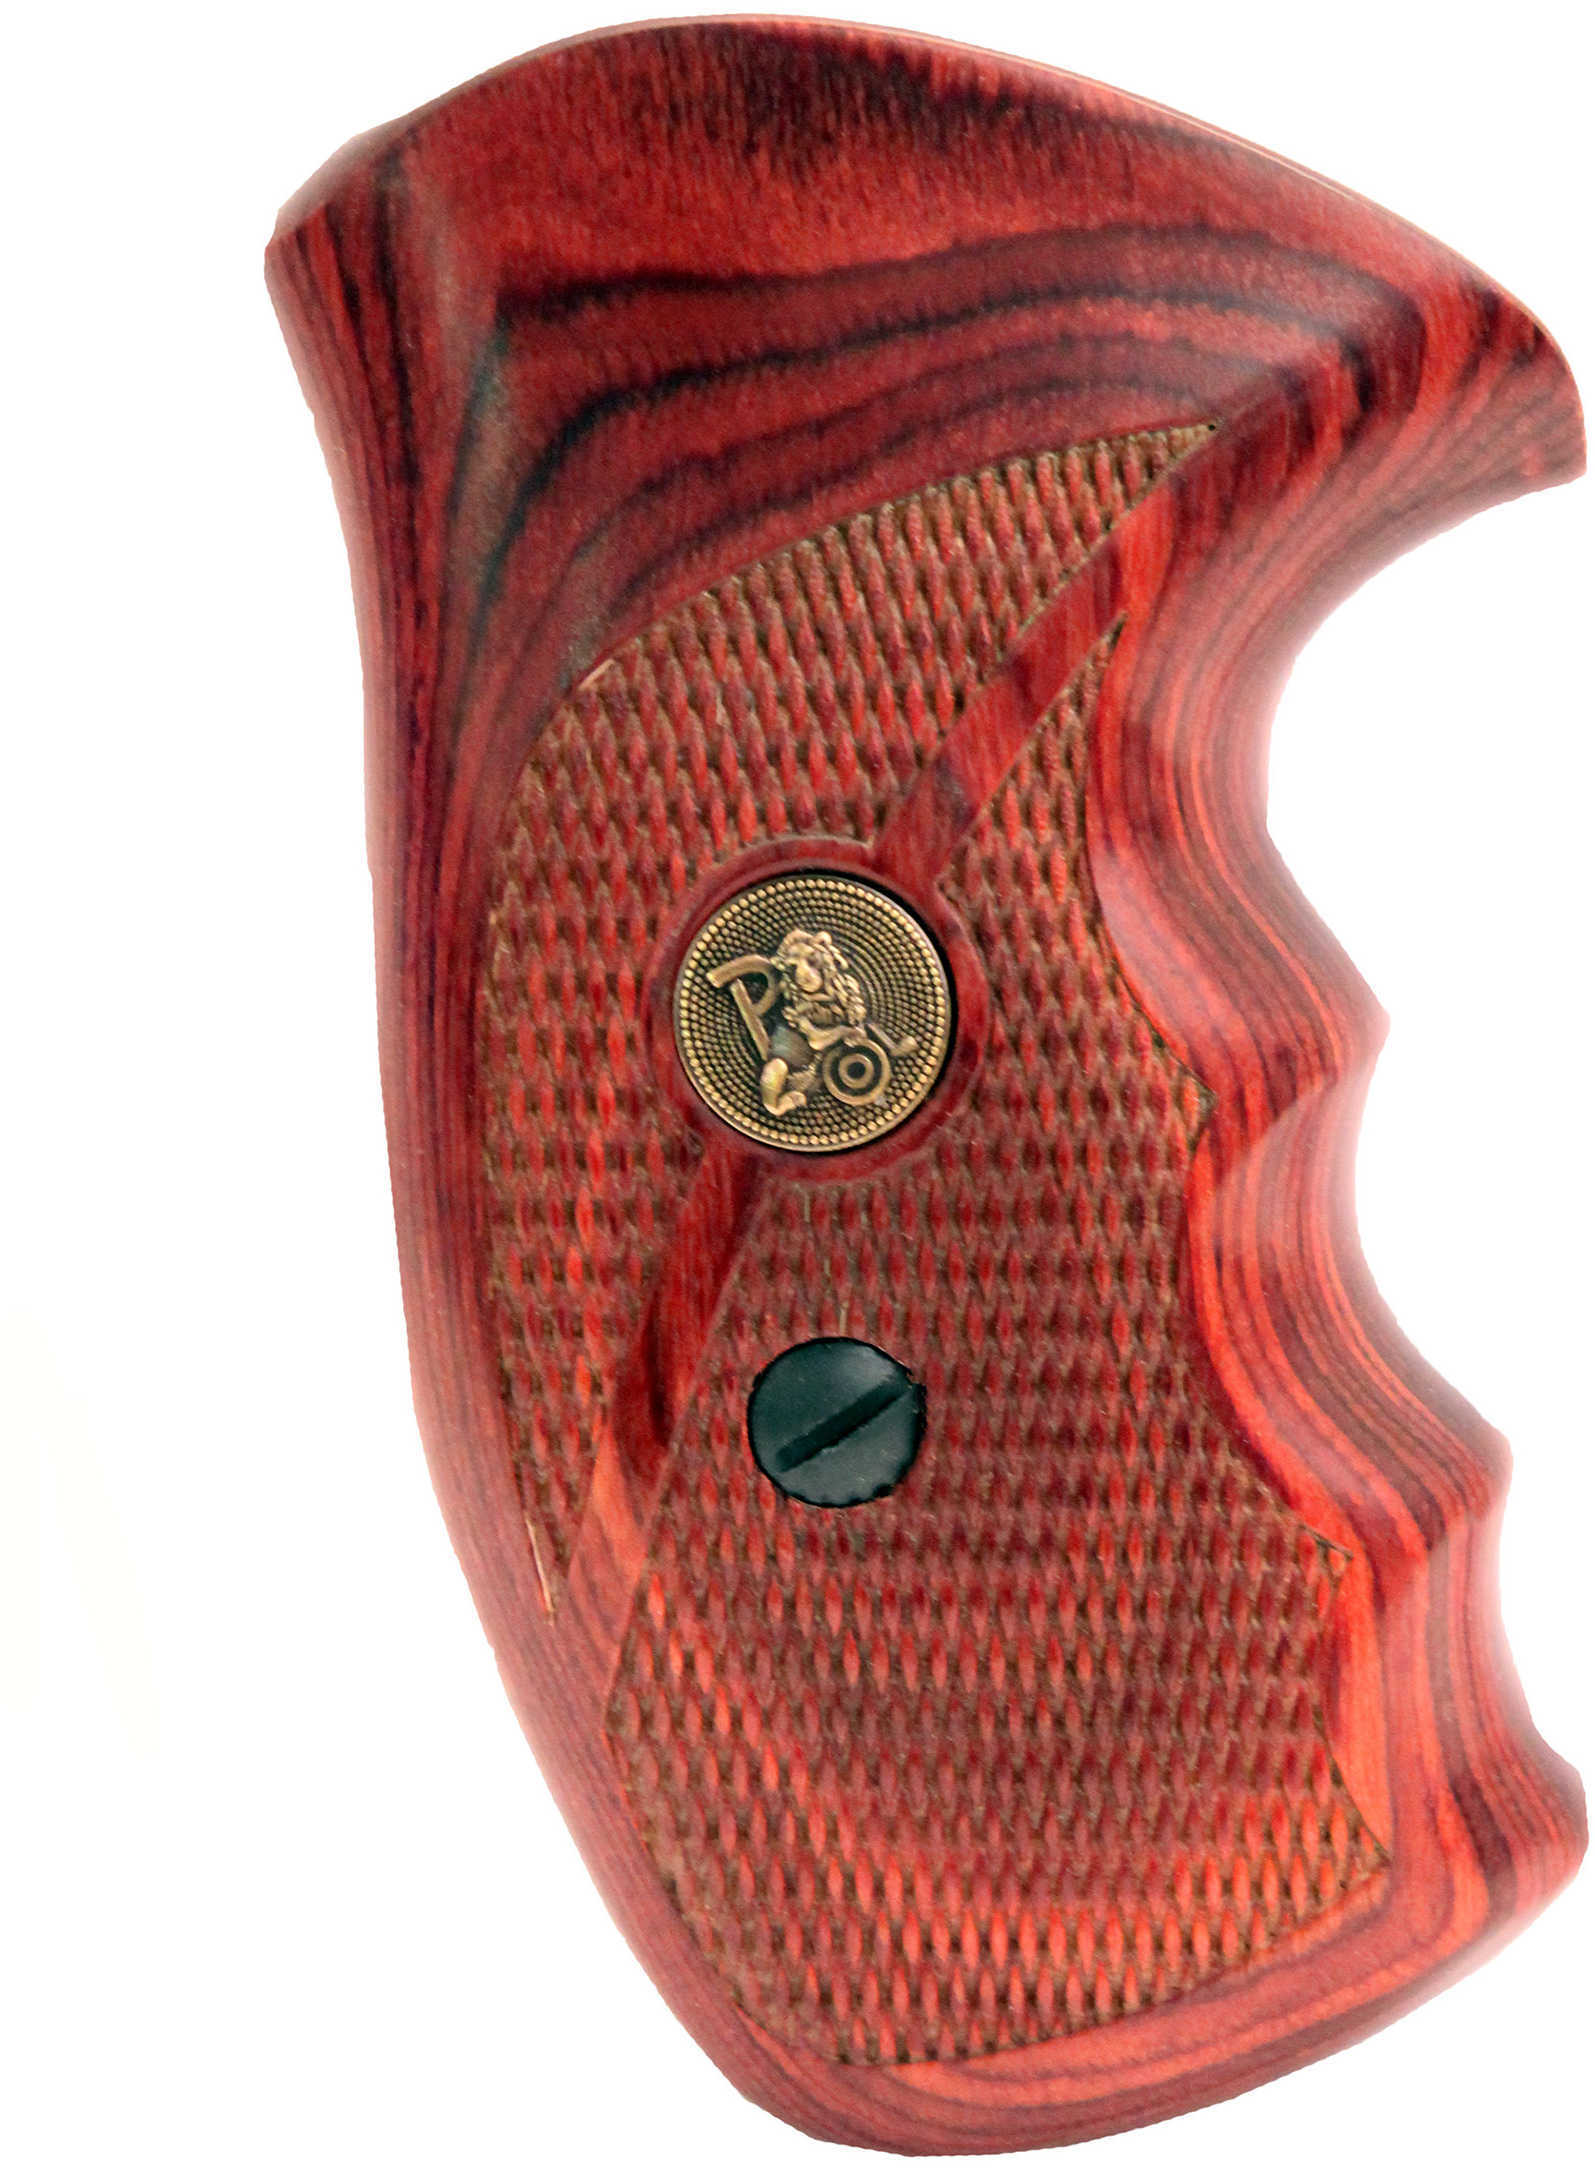 Pachmayr 63020 Renegade Laminate Revolver Grip Panels S&W K/L Frame Round Butt Checkered Wood Rosewood